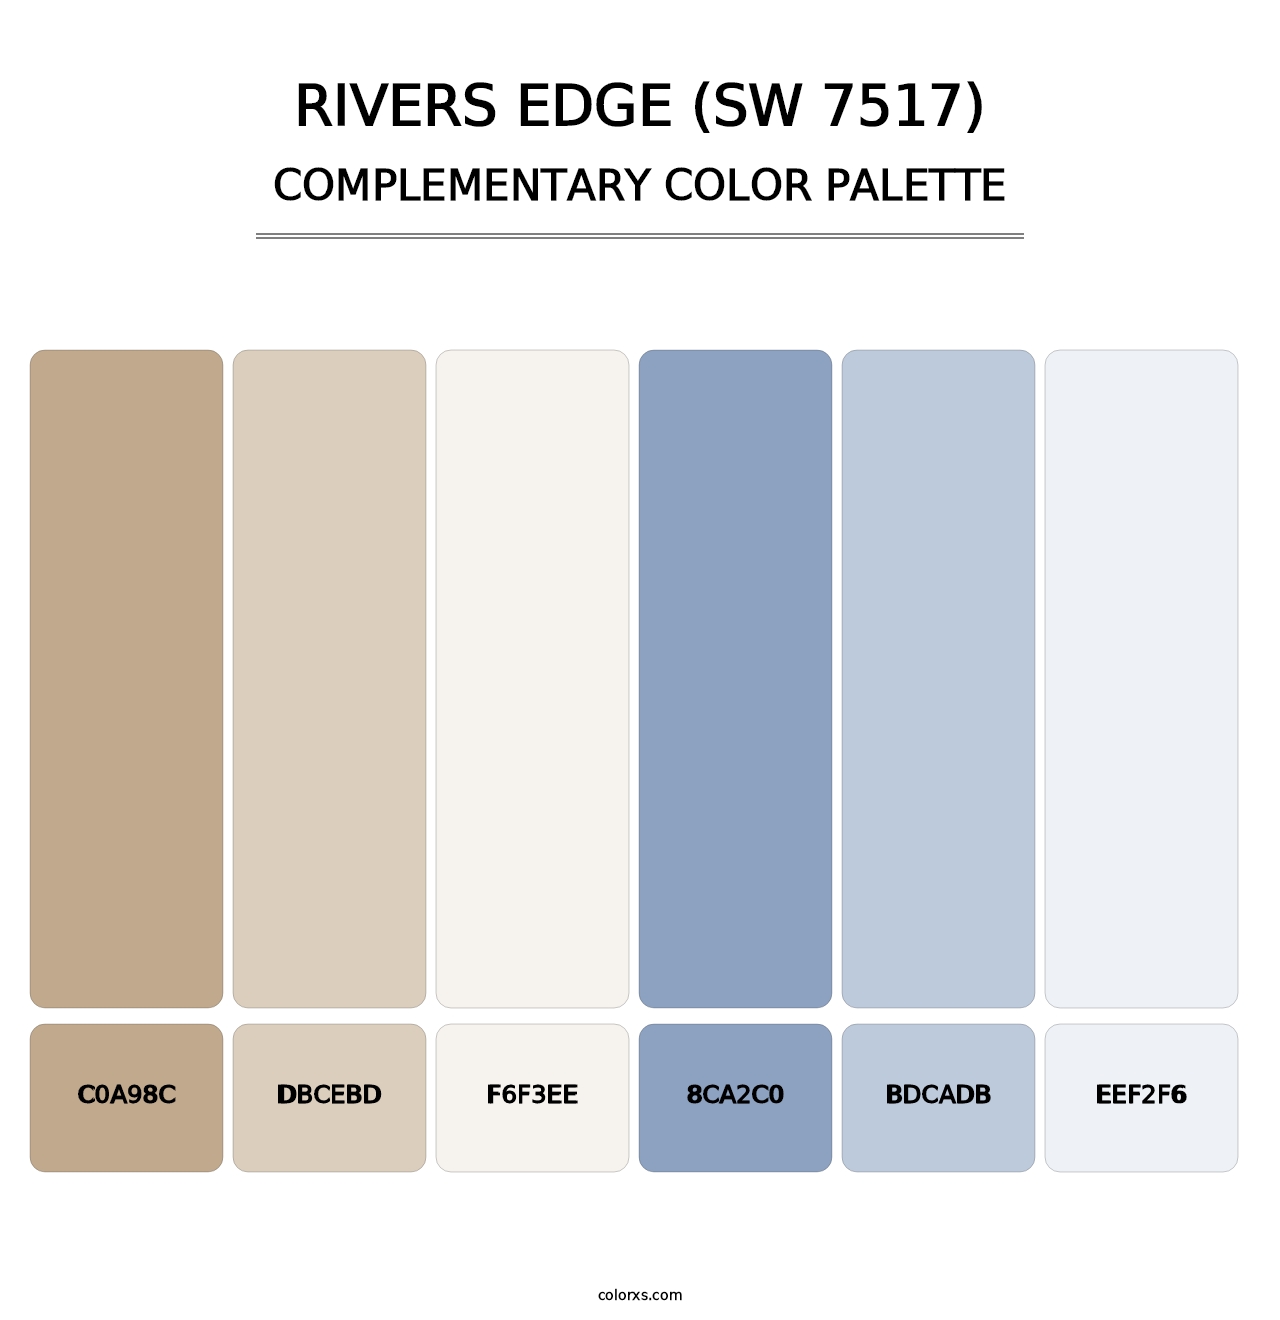 Rivers Edge (SW 7517) - Complementary Color Palette